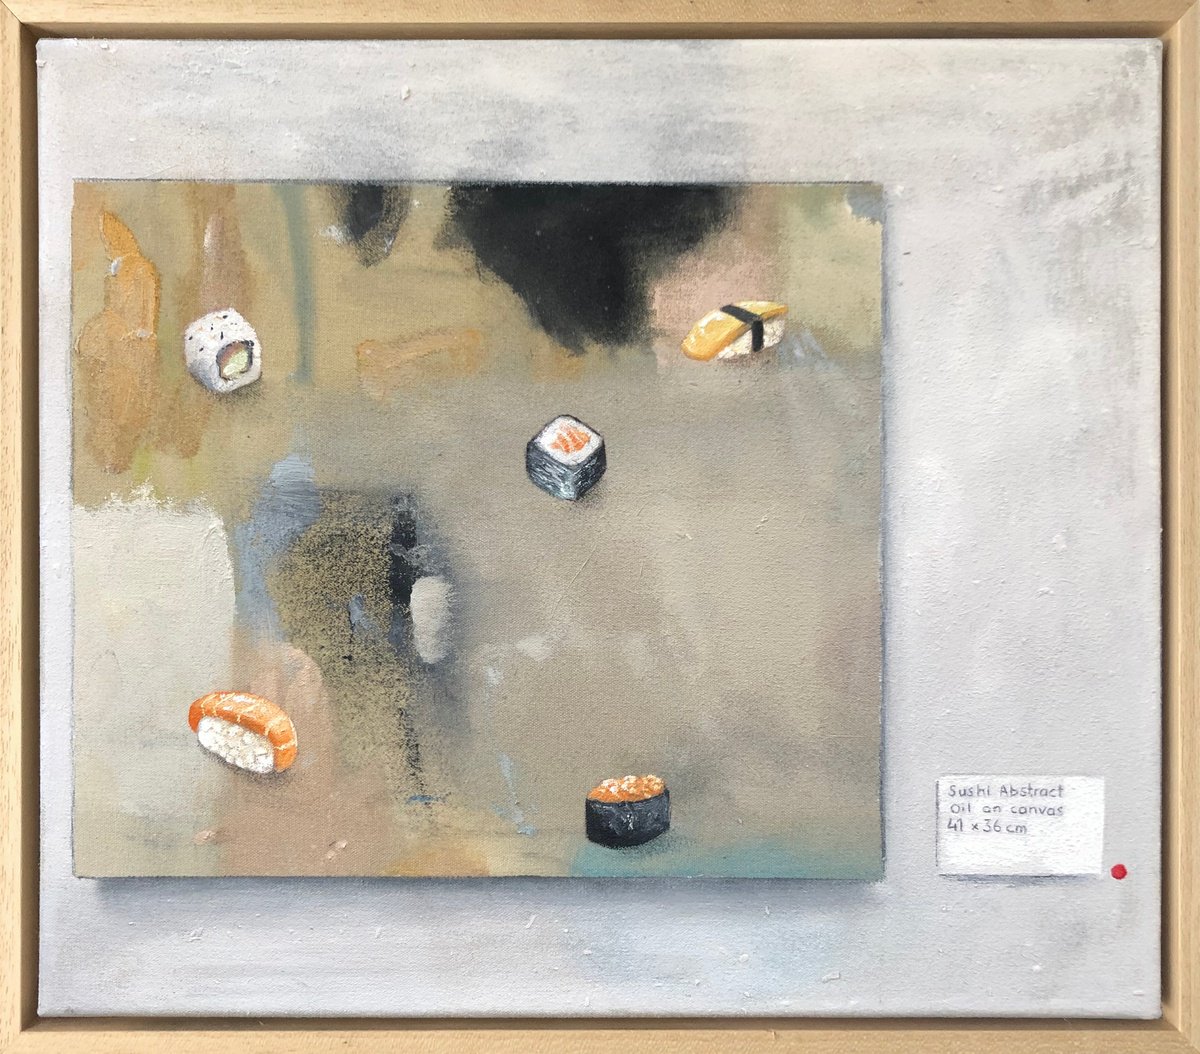 Sushi Abstract, oil on canvas, 41 x 36cm by Joshua Daniels